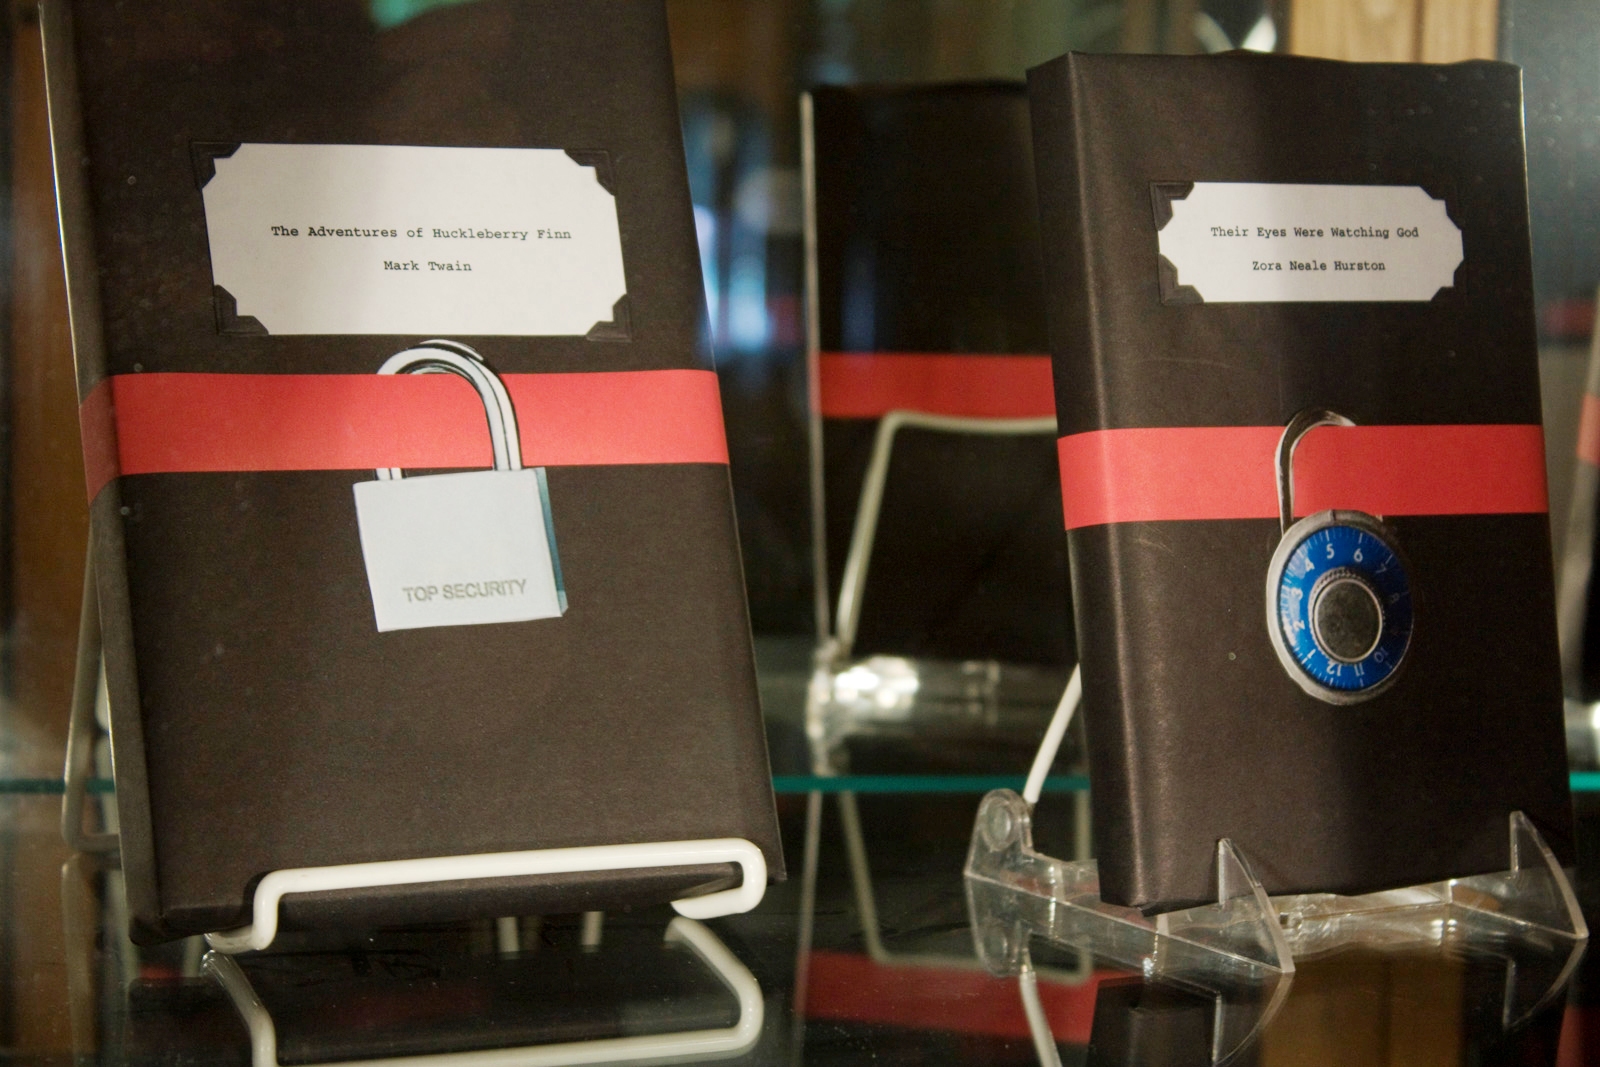 Books are under imaginary lock-and-key in a display at Columbia College Library in Chicago.